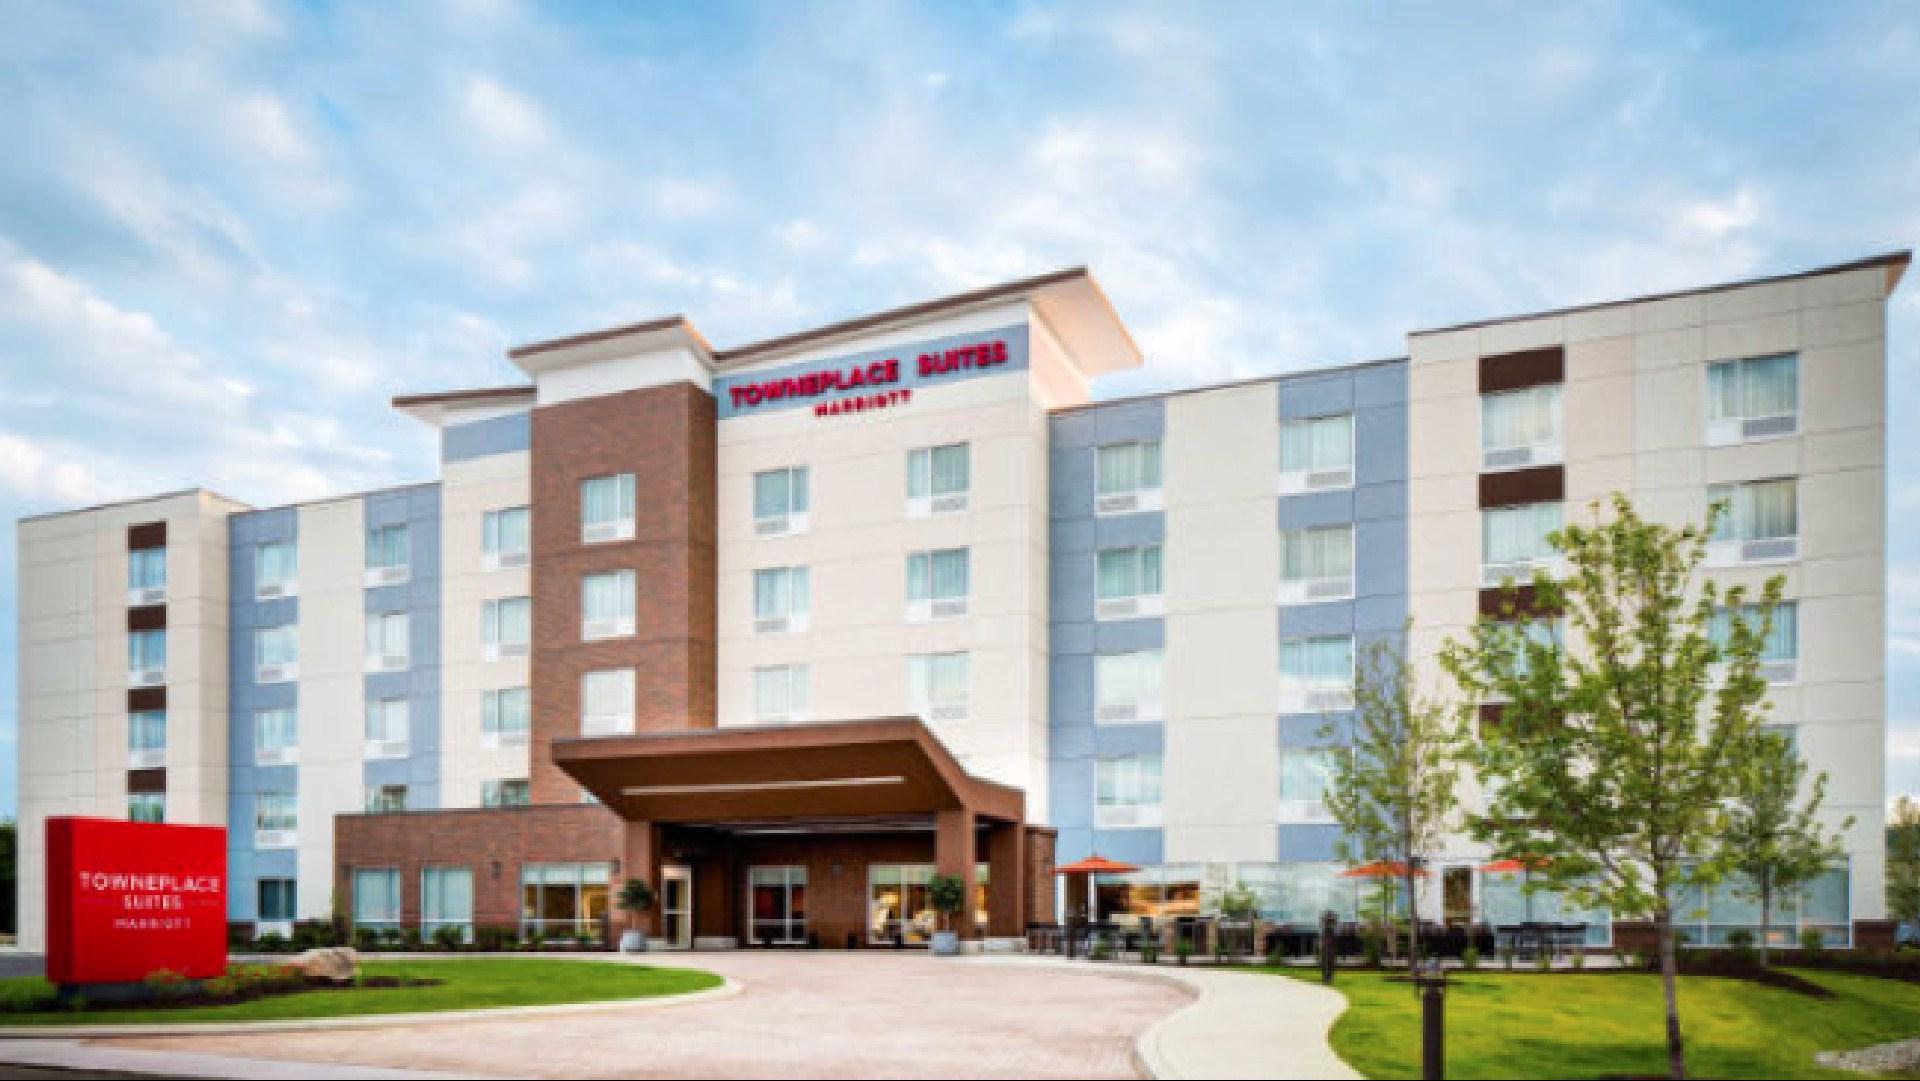 TownePlace Suites Clarksville in Clarksville, TN